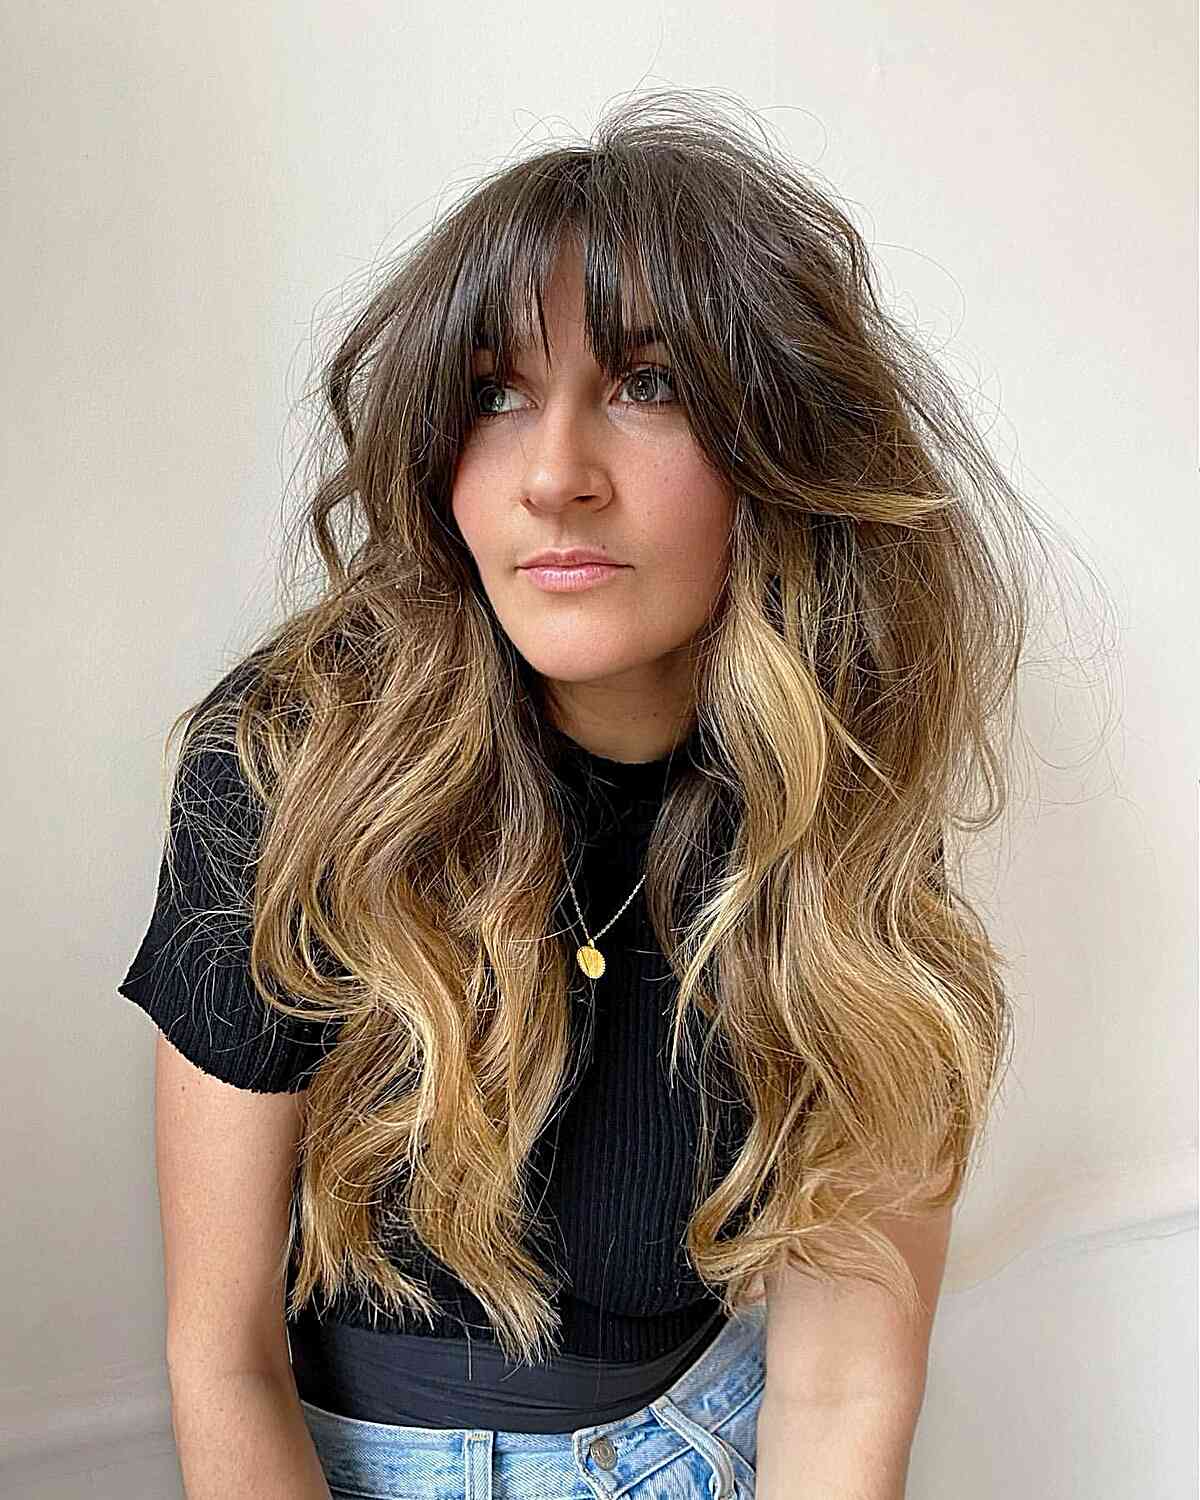 Balayage with Bangs: 25 Coolest Ways to Get Hand-Painted Hair Colors with a Fringe